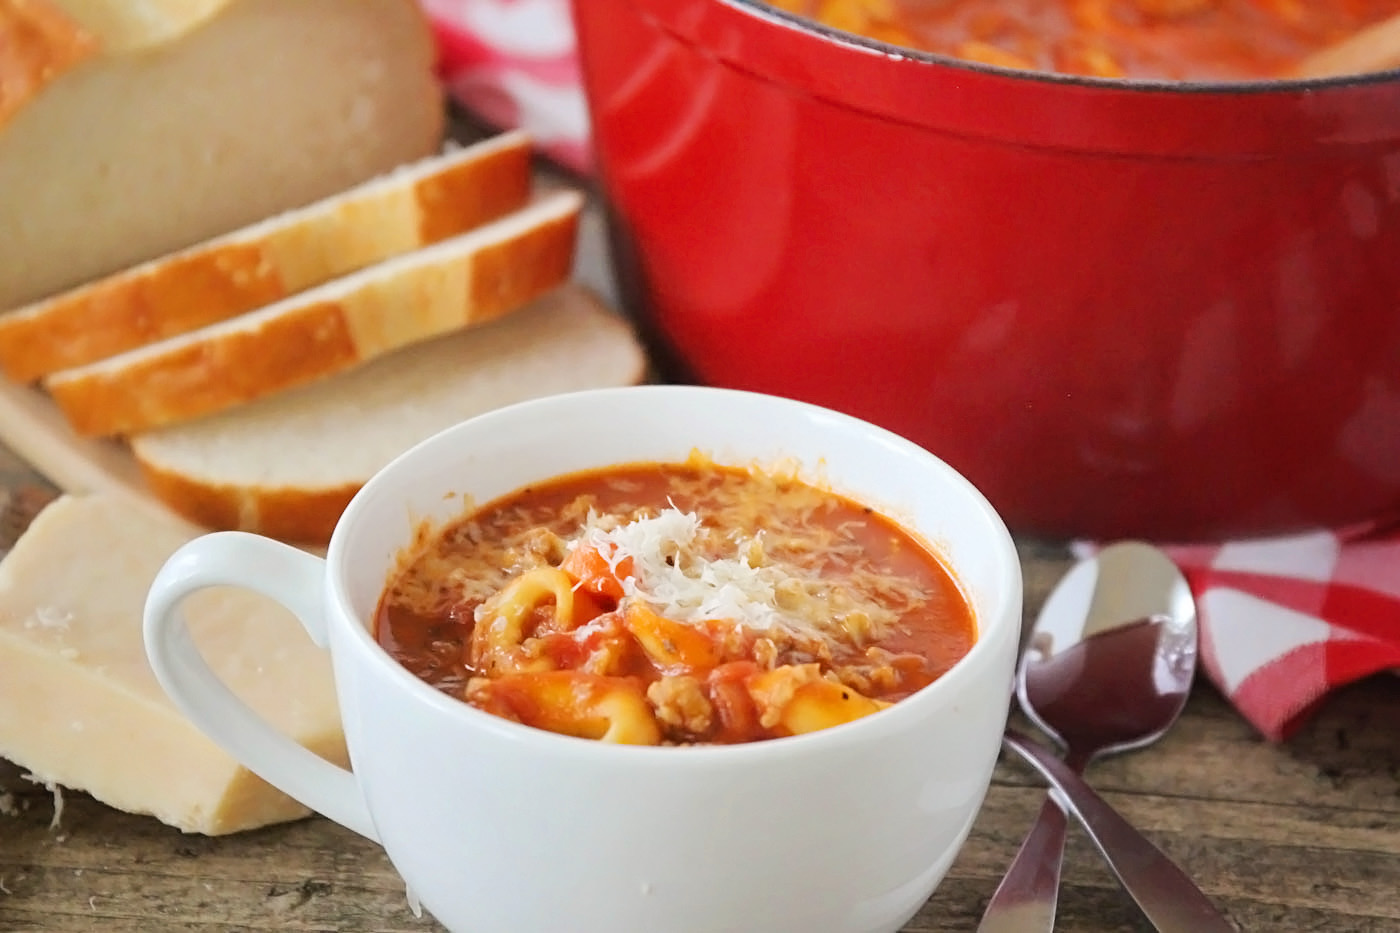 If you're short on time and looking for a warm, hearty meal to serve your family this week, you need to try this Quick and Easy Tomato Tortellini Soup Recipe!